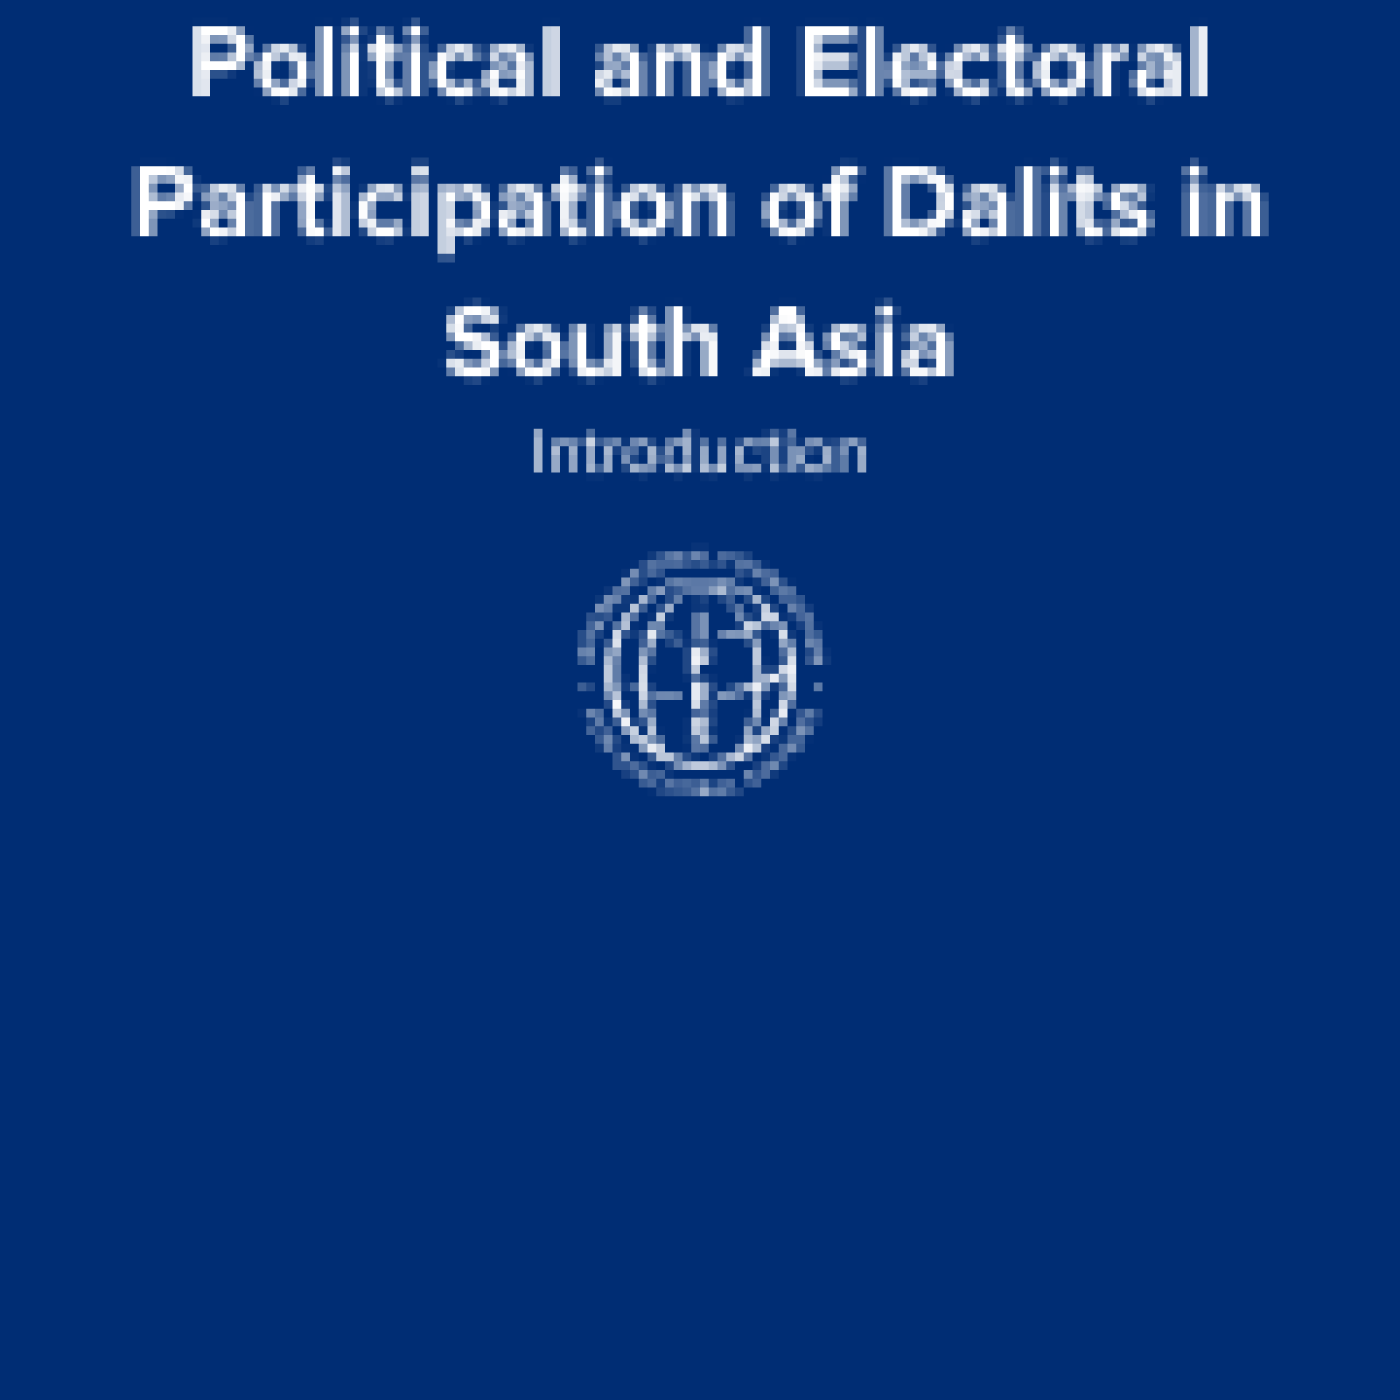 Political and Electoral Participation of Dalits in South Asia: Introduction